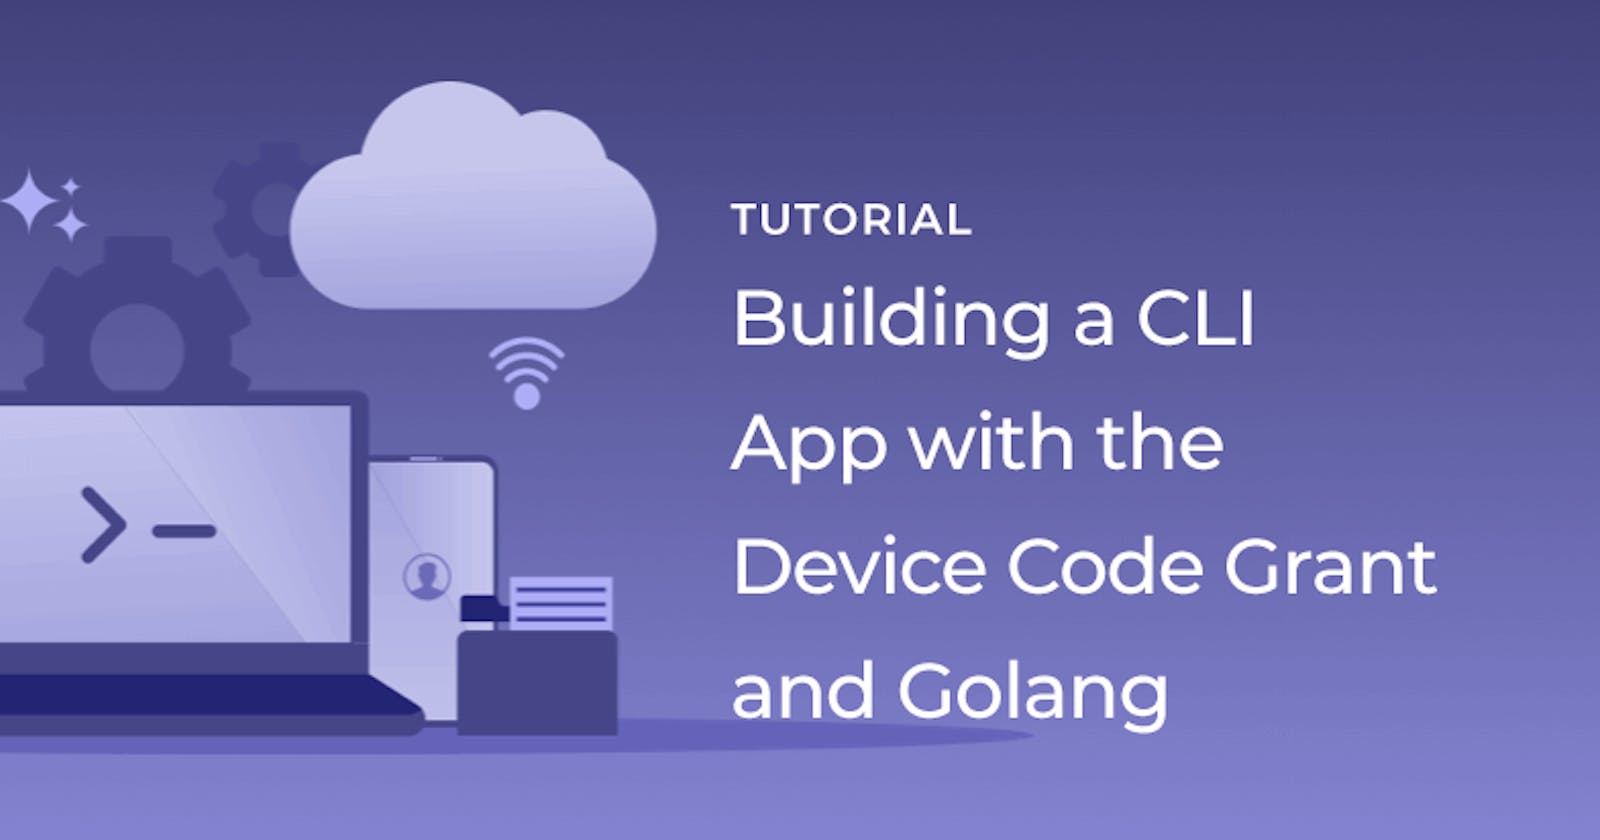 Building a CLI app with the Device Code grant and golang